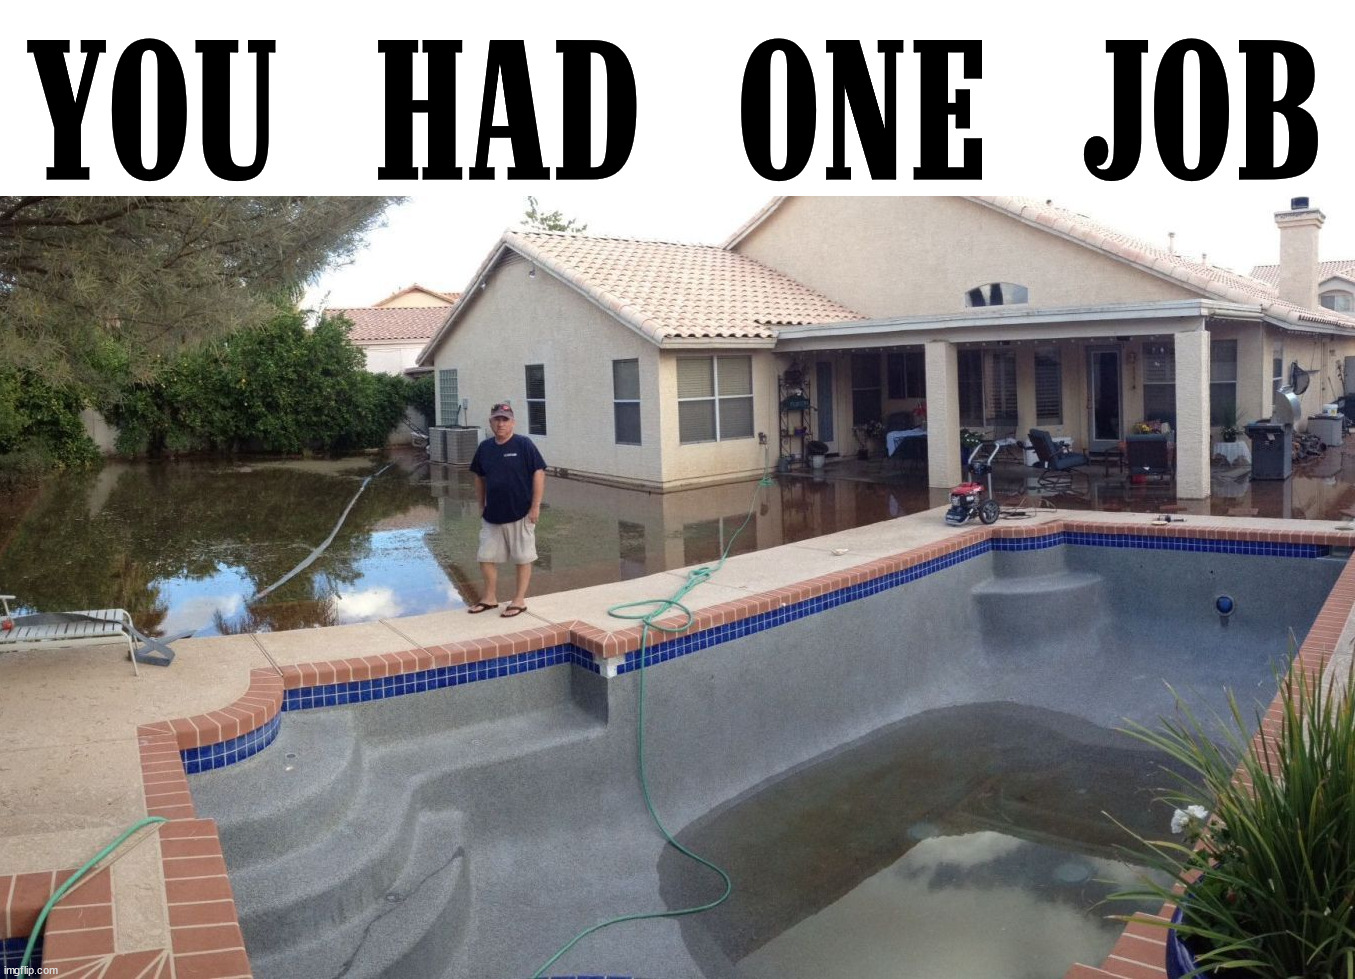 YOU HAD ONE JOB | image tagged in you had one job | made w/ Imgflip meme maker